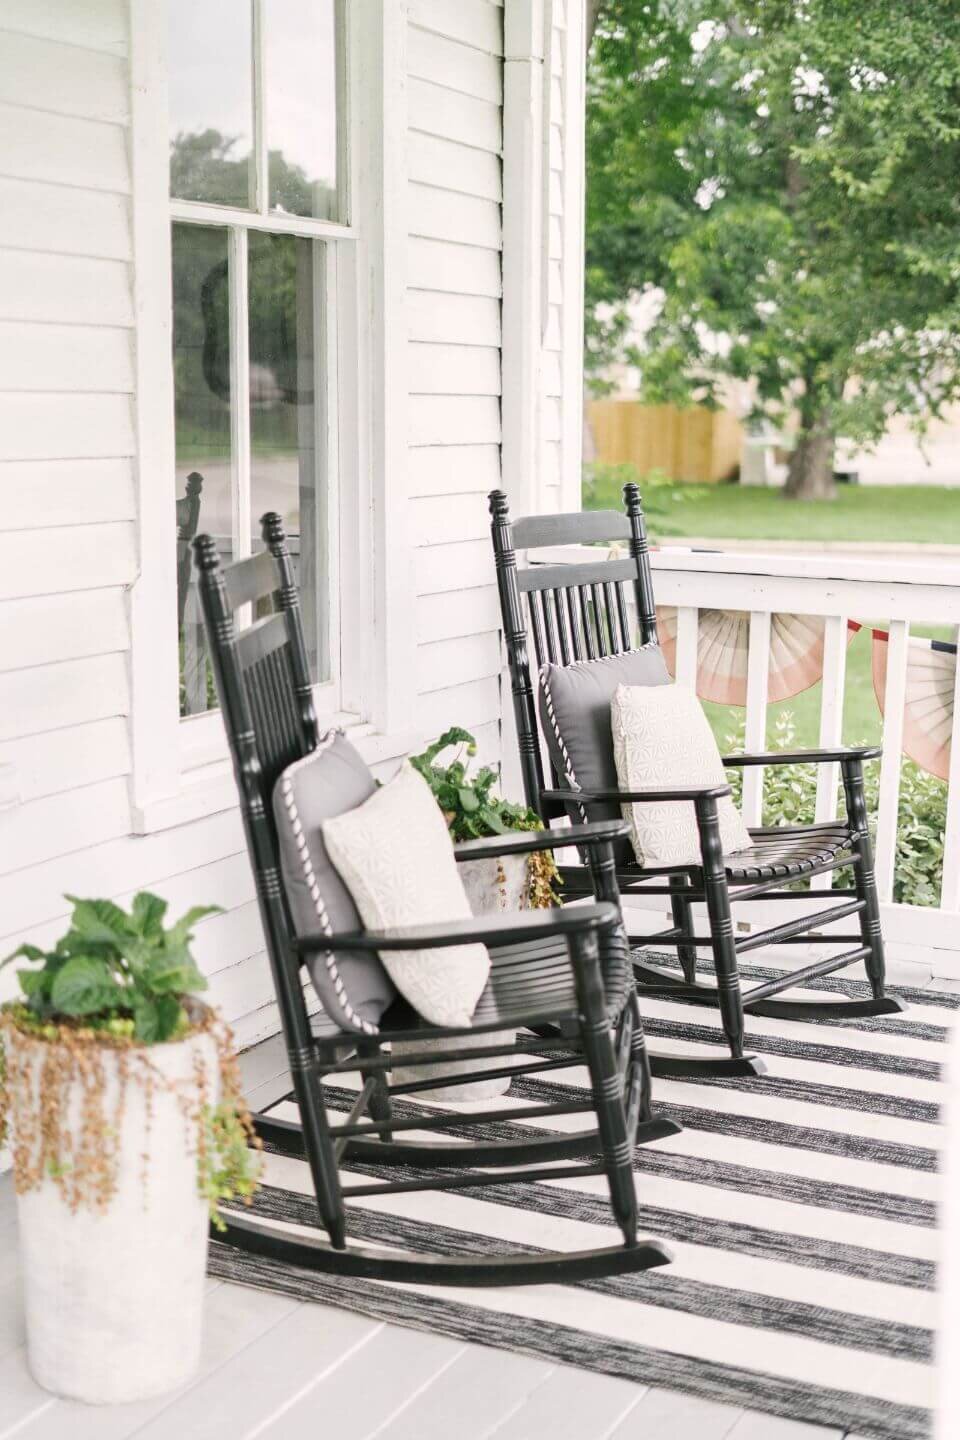 The Morrow House Home Tour - Historic Waco AirBnb - Cottage Home external - As Seen in Fixer Upper Season 5 - Cottage Home external Rocking Chairs -农舍生万博赞助意大利甲级联赛活。jpg